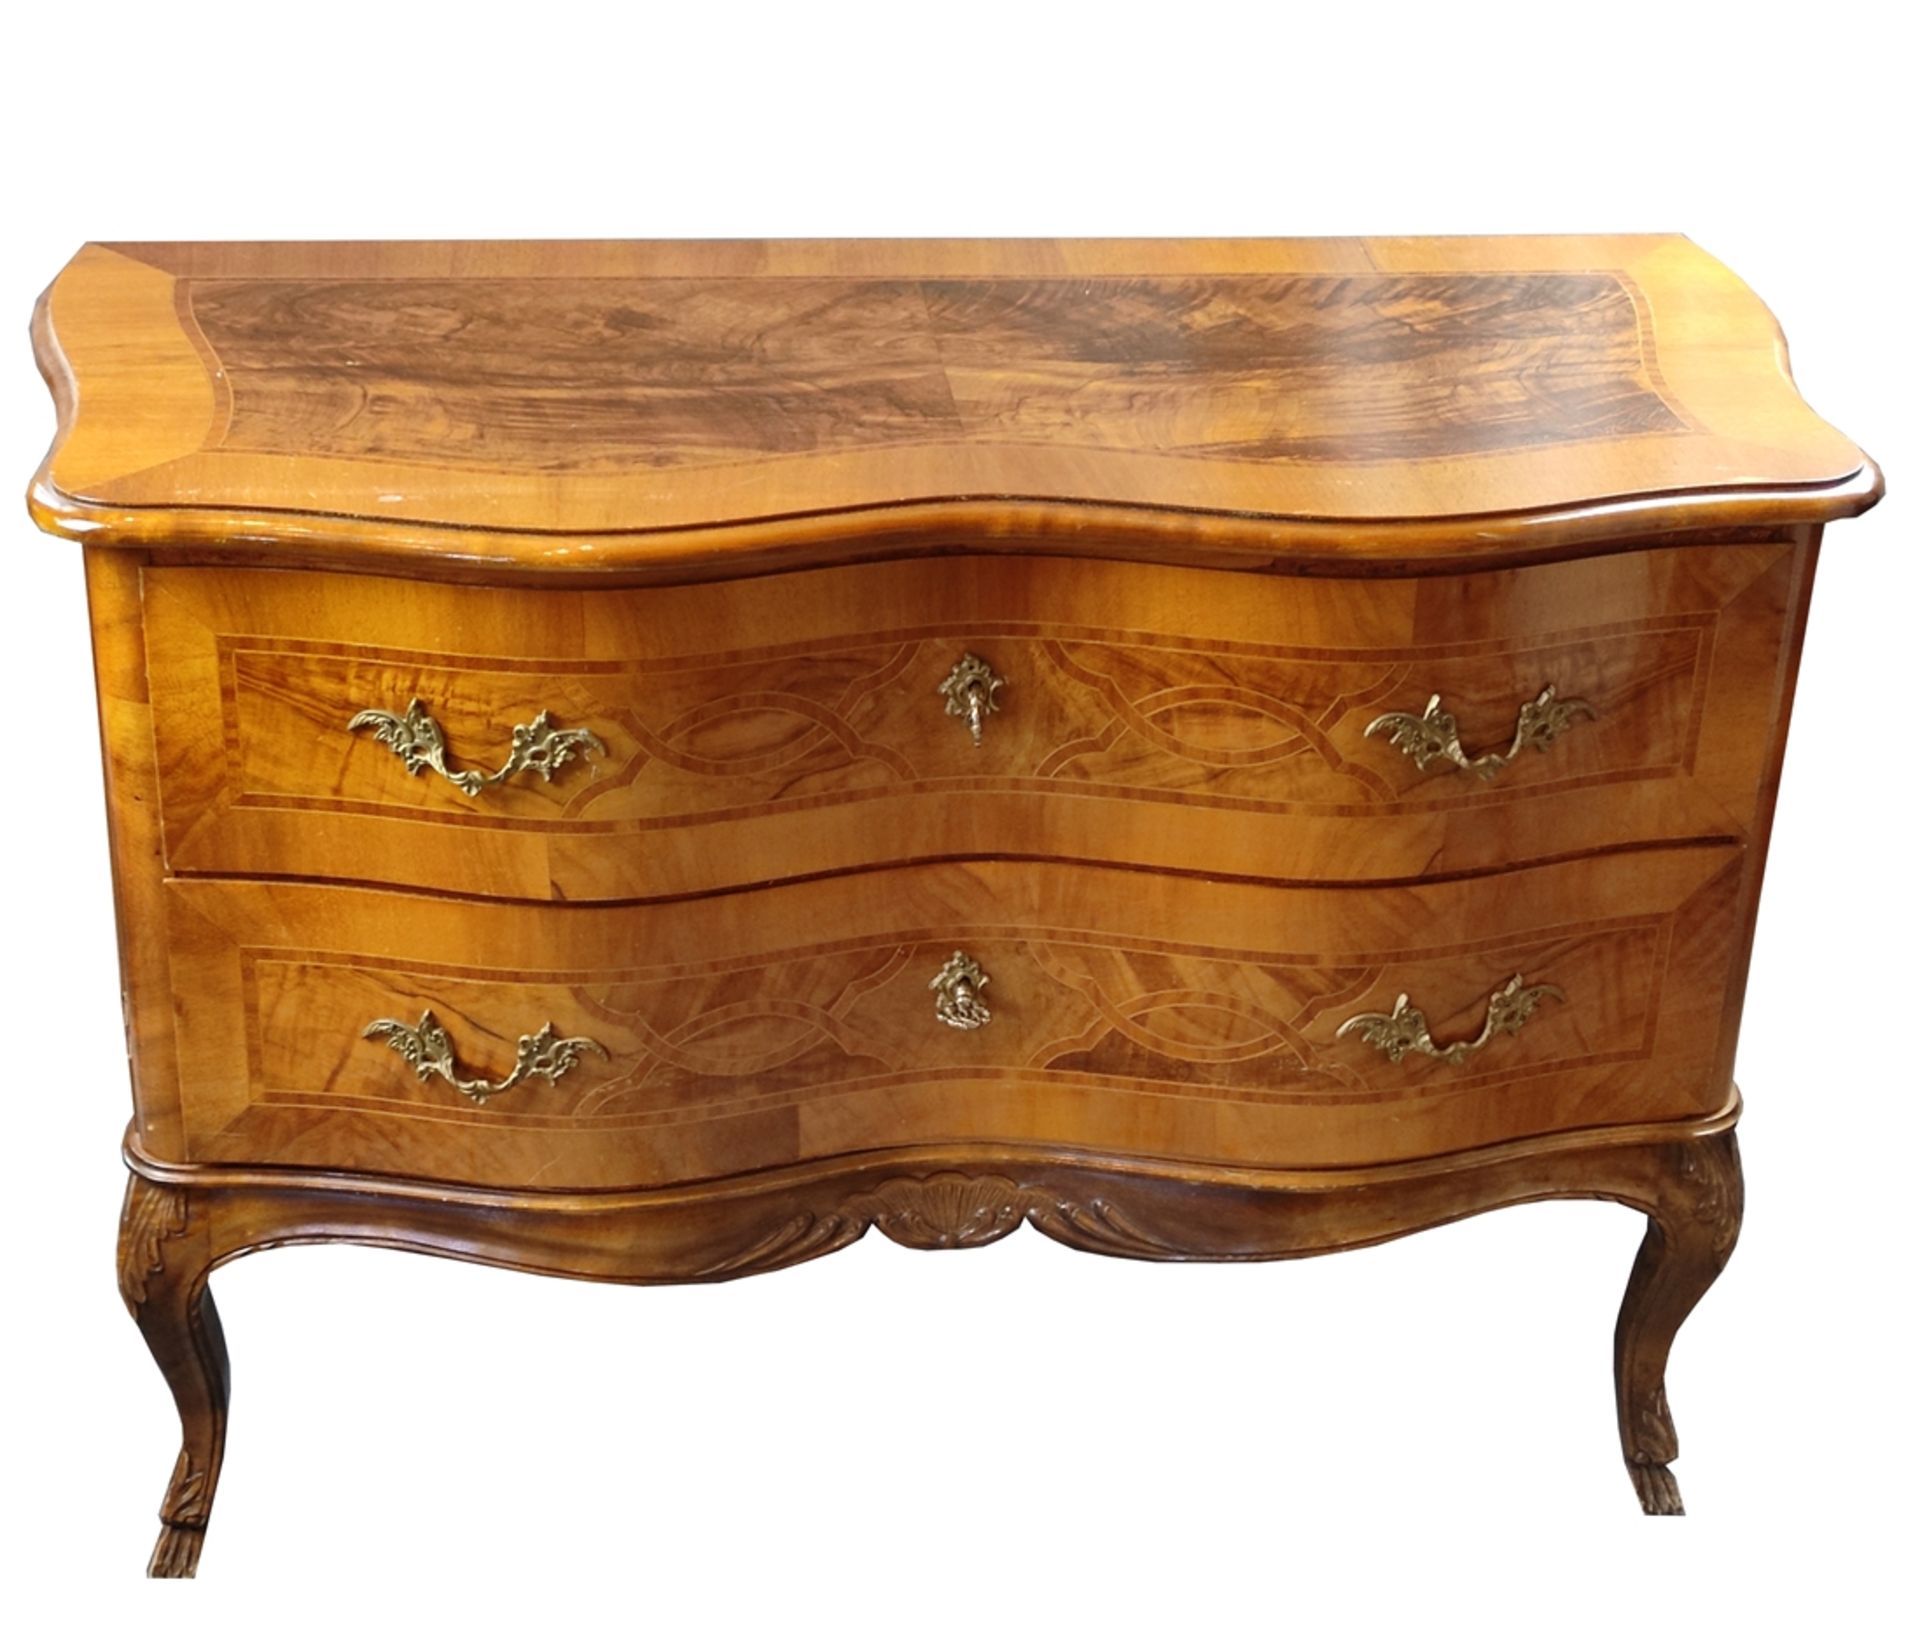 Rococo-style chest of drawers, curved shape with geometric inlays, 2 drawers, top with inlay decora